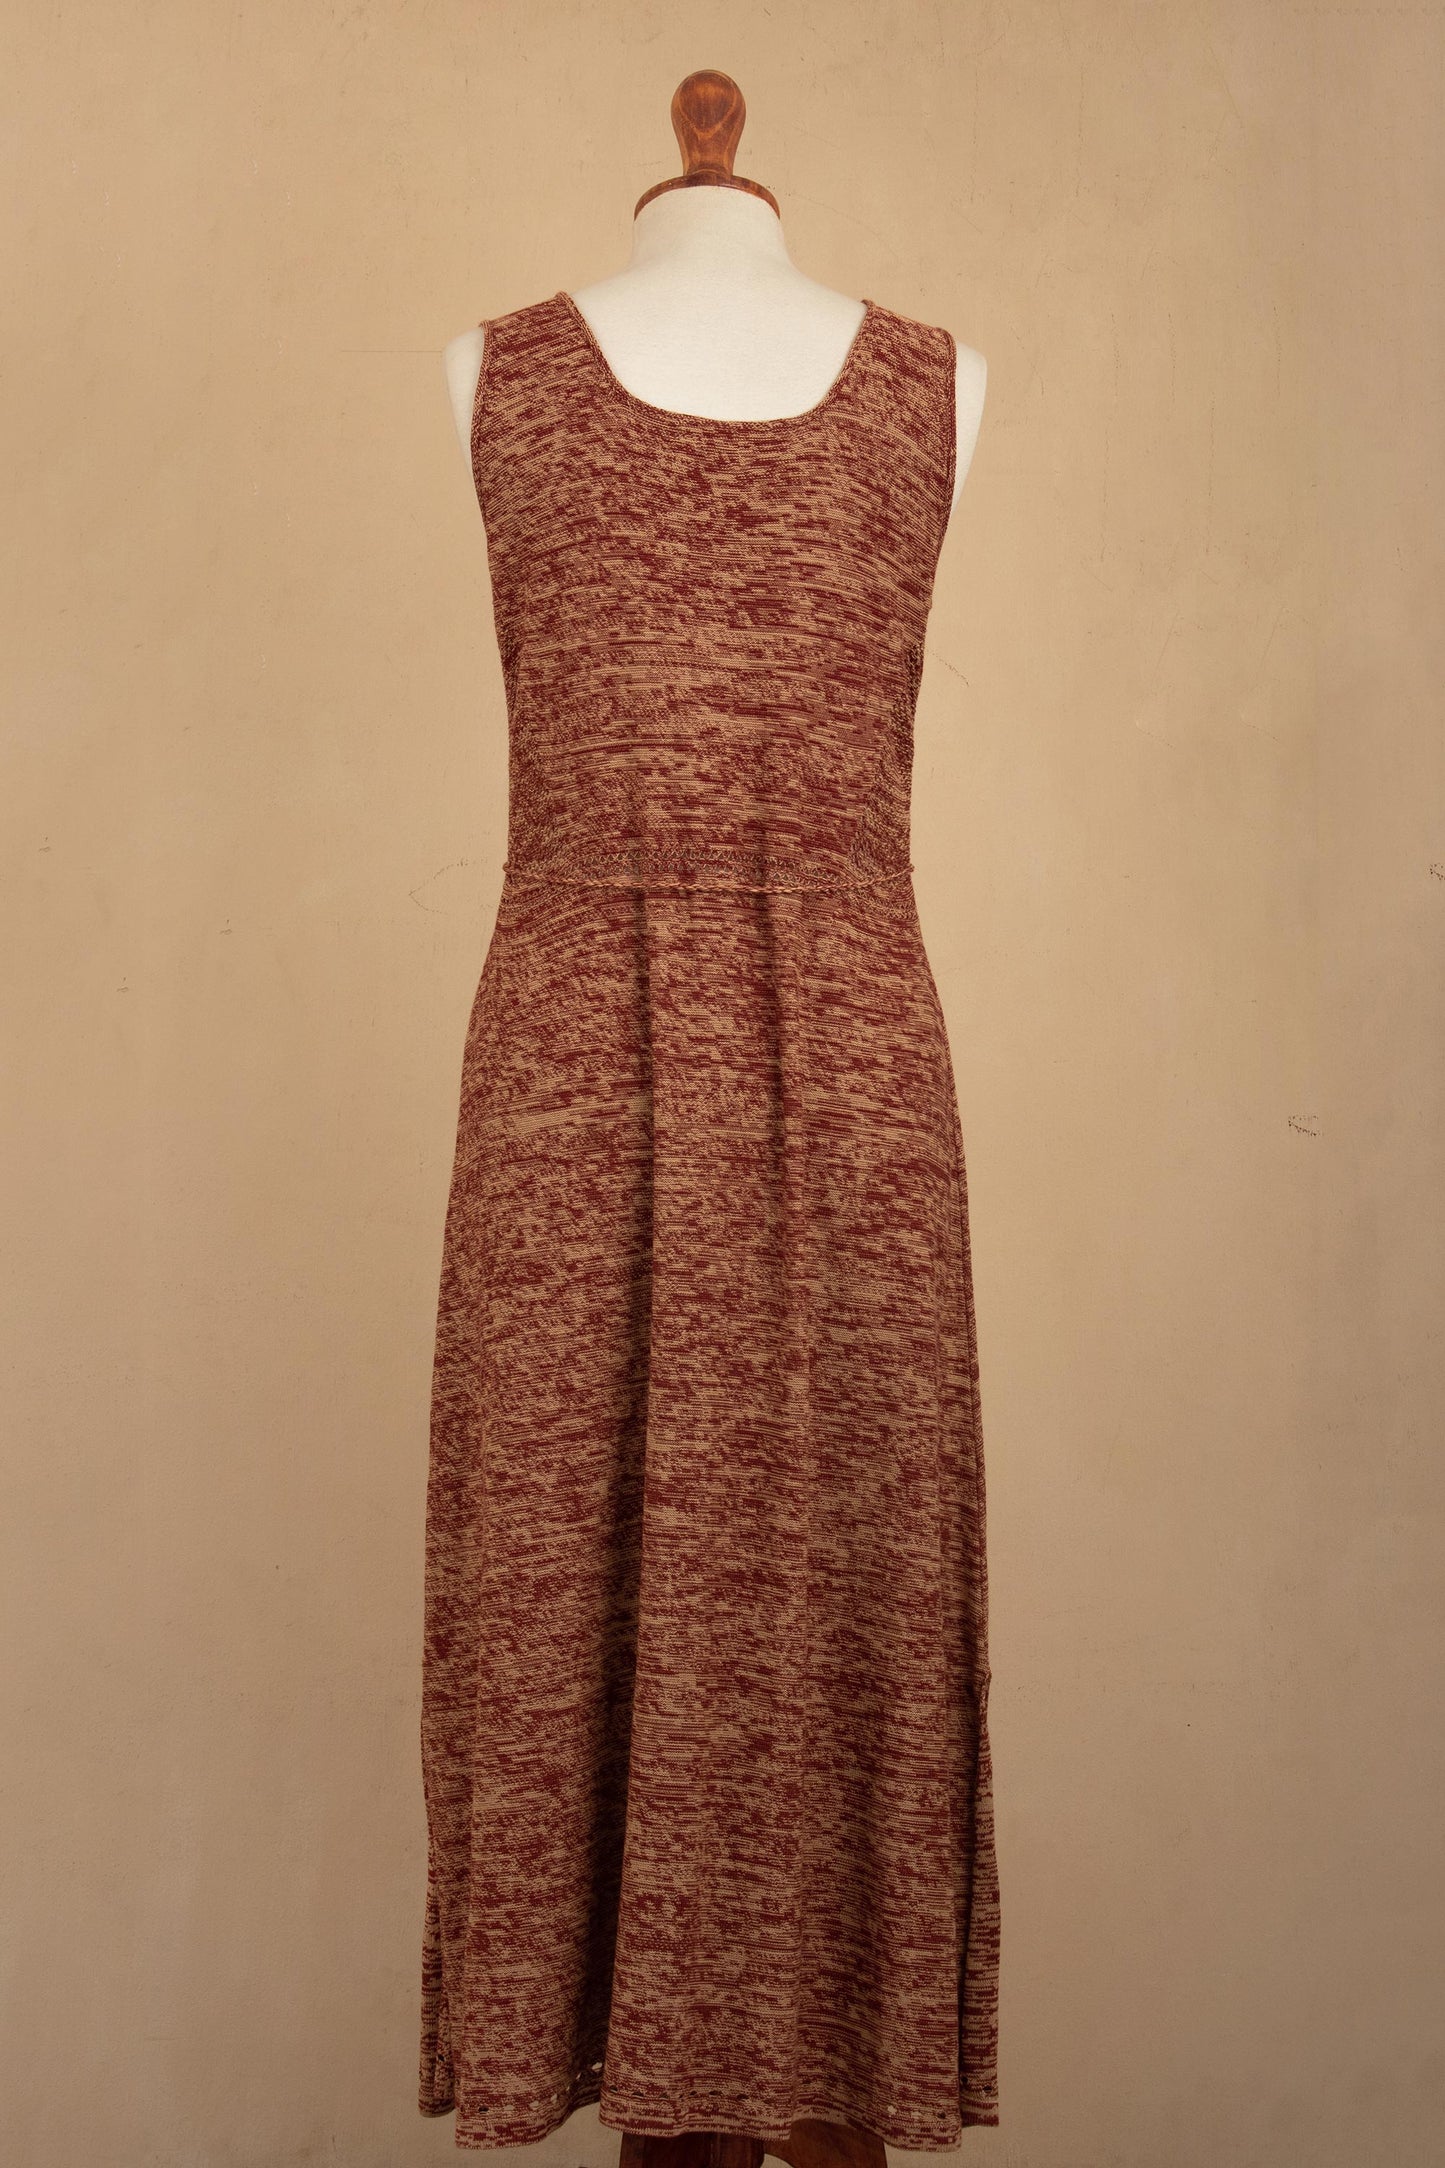 Toqo Melange Organic Cotton Buttoned Maxi Dress in Russet Red from Peru